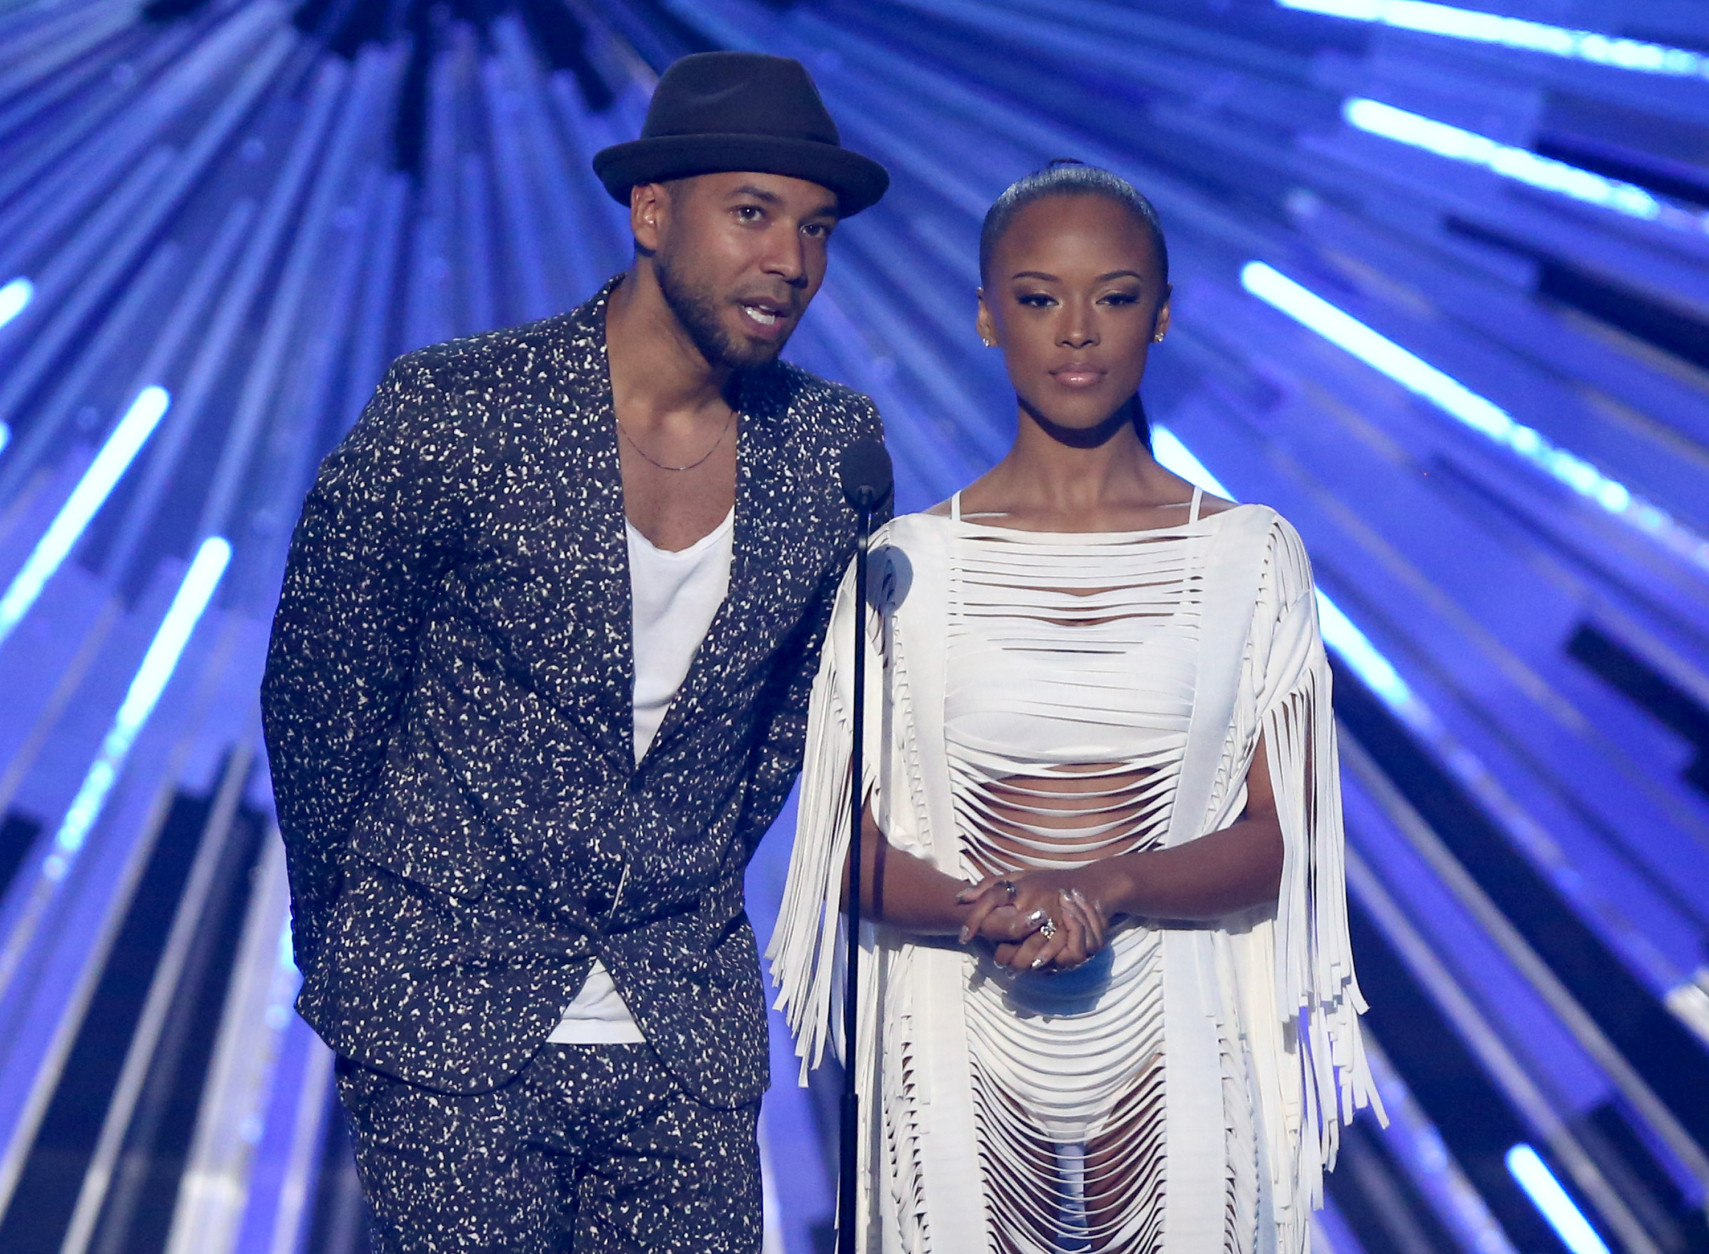 Jussie Smollett, left, and Serayah present the award for video with a social message at the MTV Video Music Awards at the Microsoft Theater on Sunday, Aug. 30, 2015, in Los Angeles. (Photo by Matt Sayles/Invision/AP)